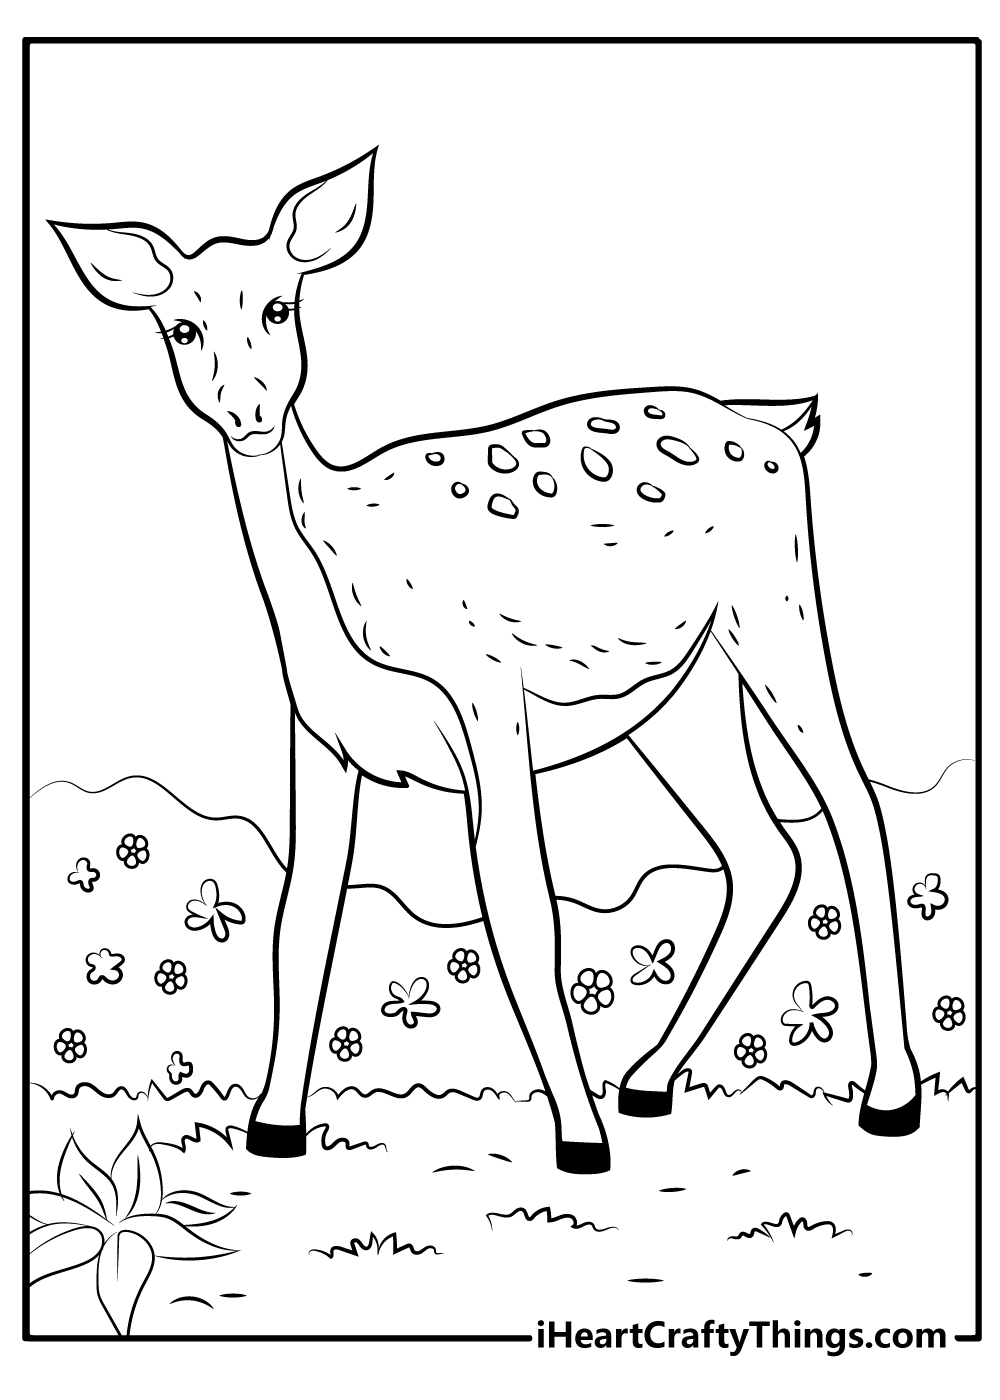 Deer Coloring Pages free printable for kids